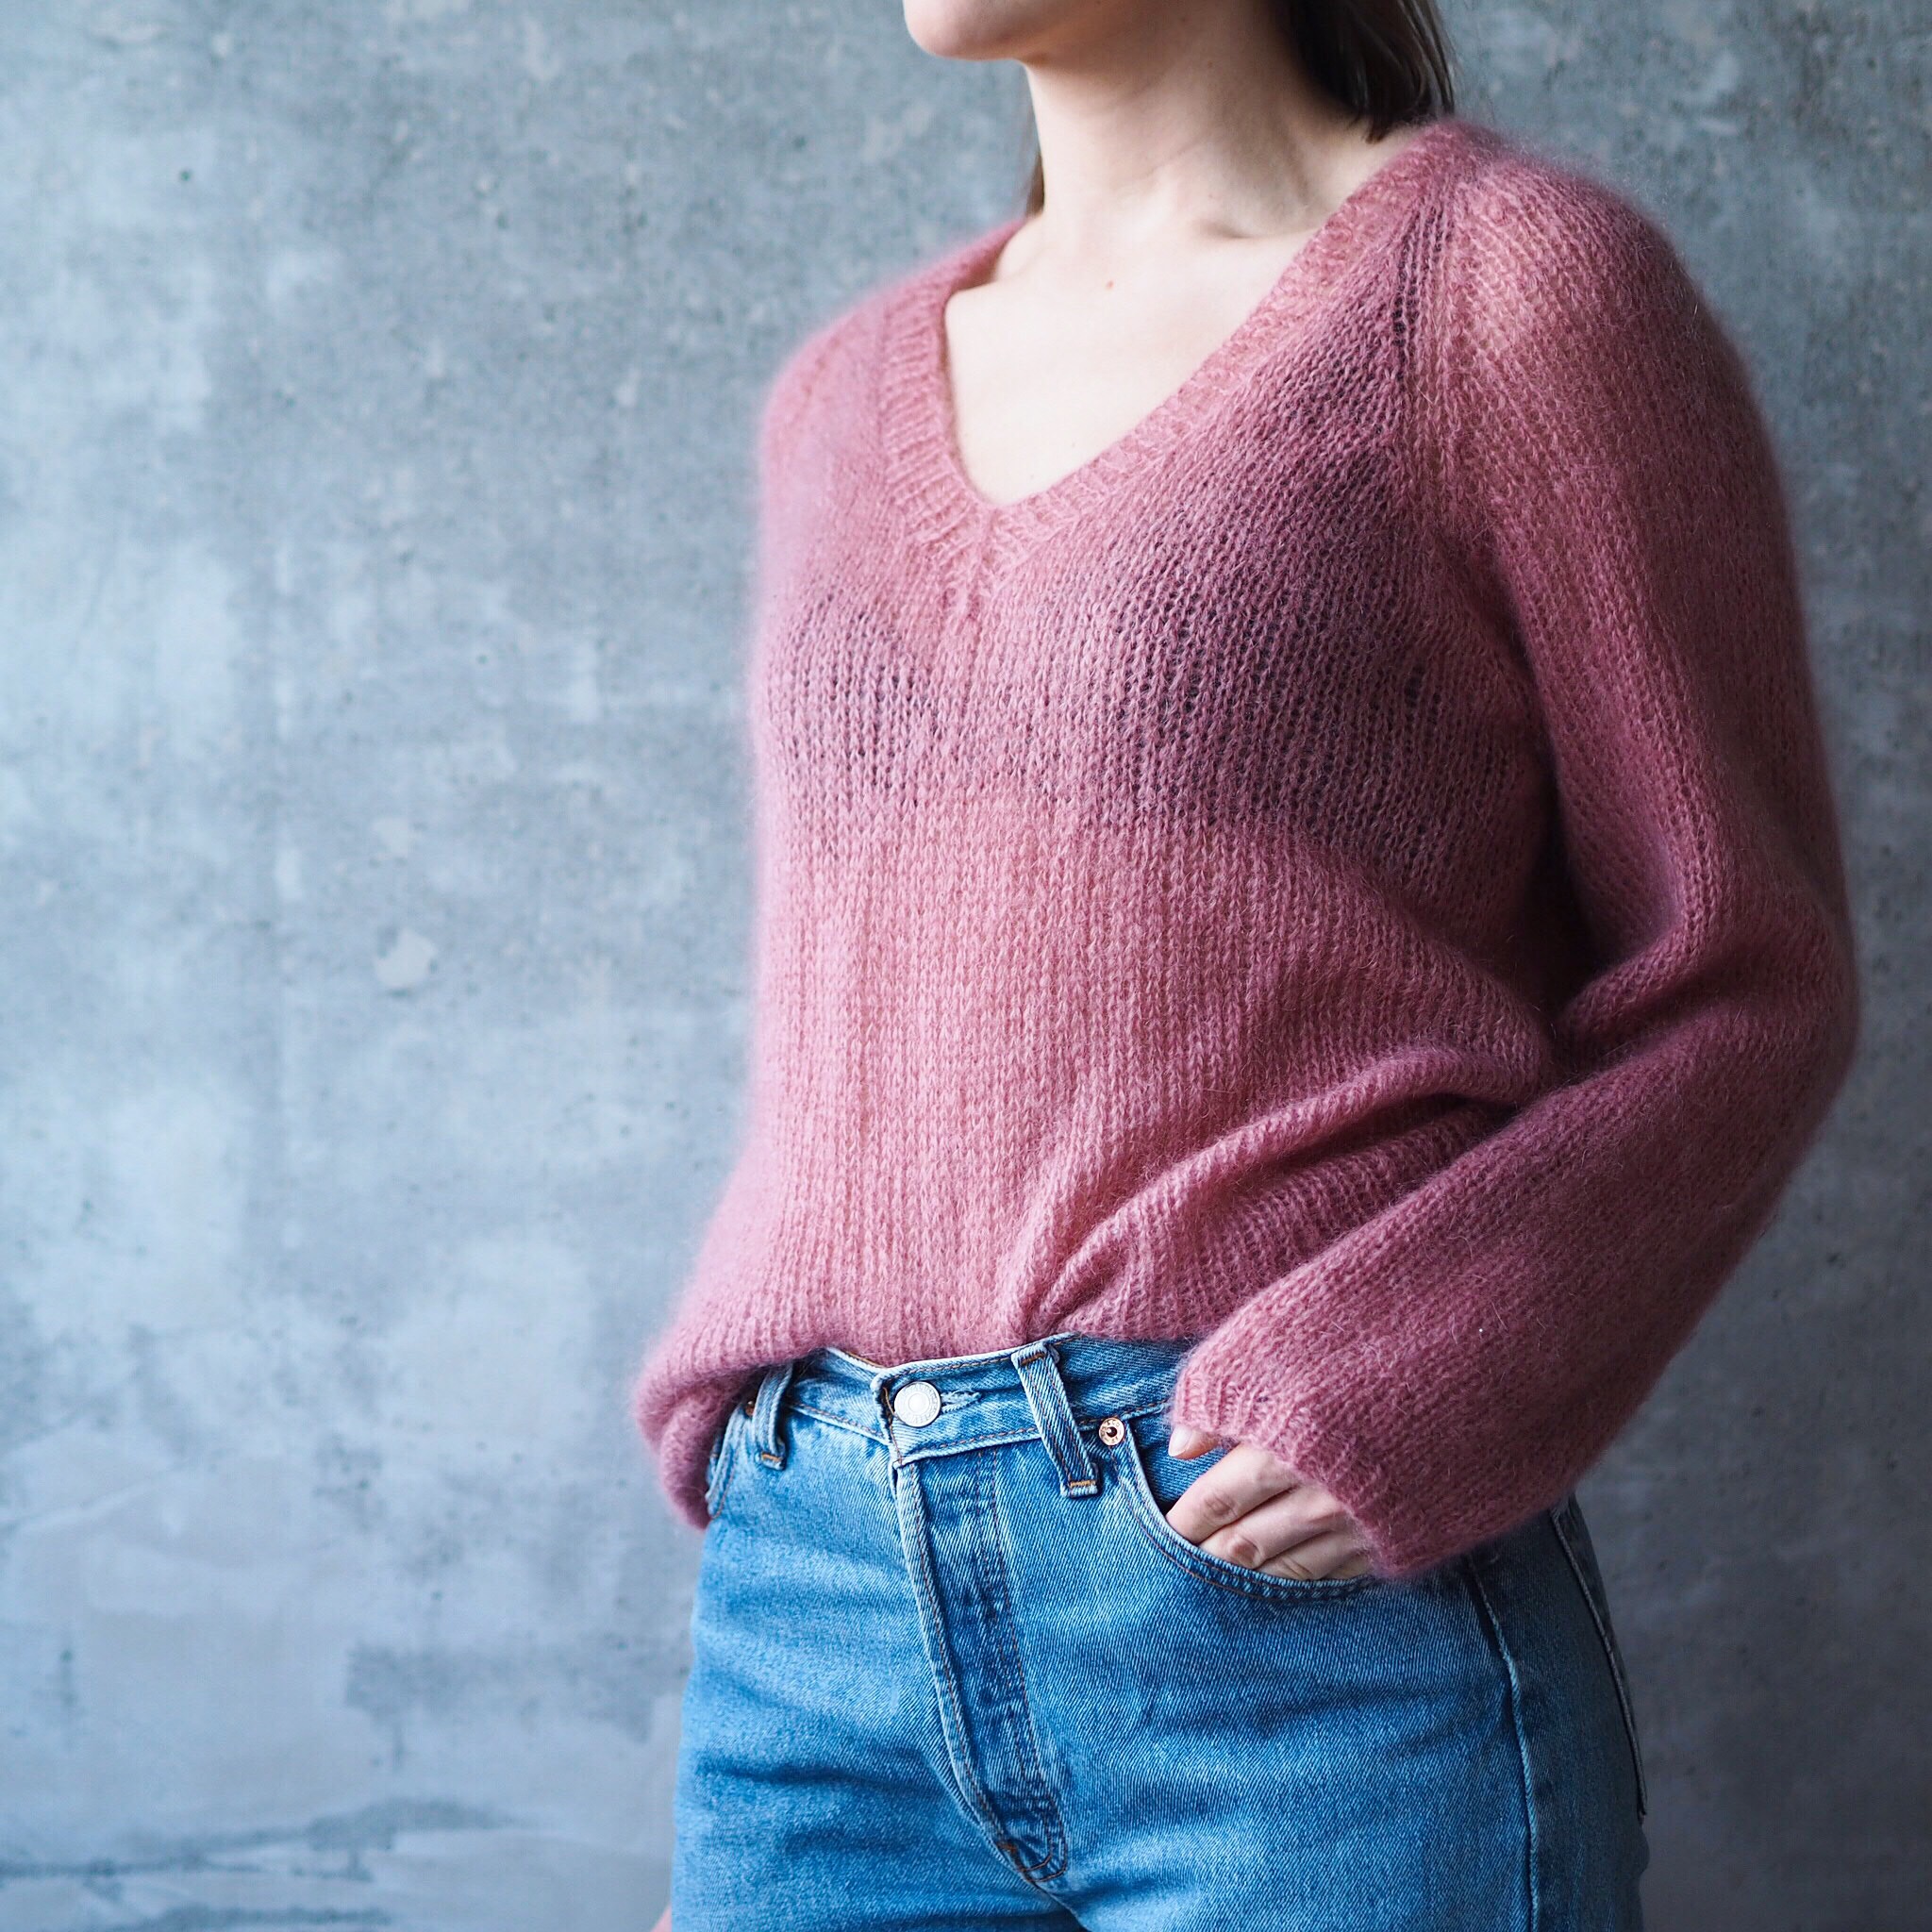  - Candyfloss sweater | Knitting pattern V-neck sweater - by HipKnitShop - 01/11/2017